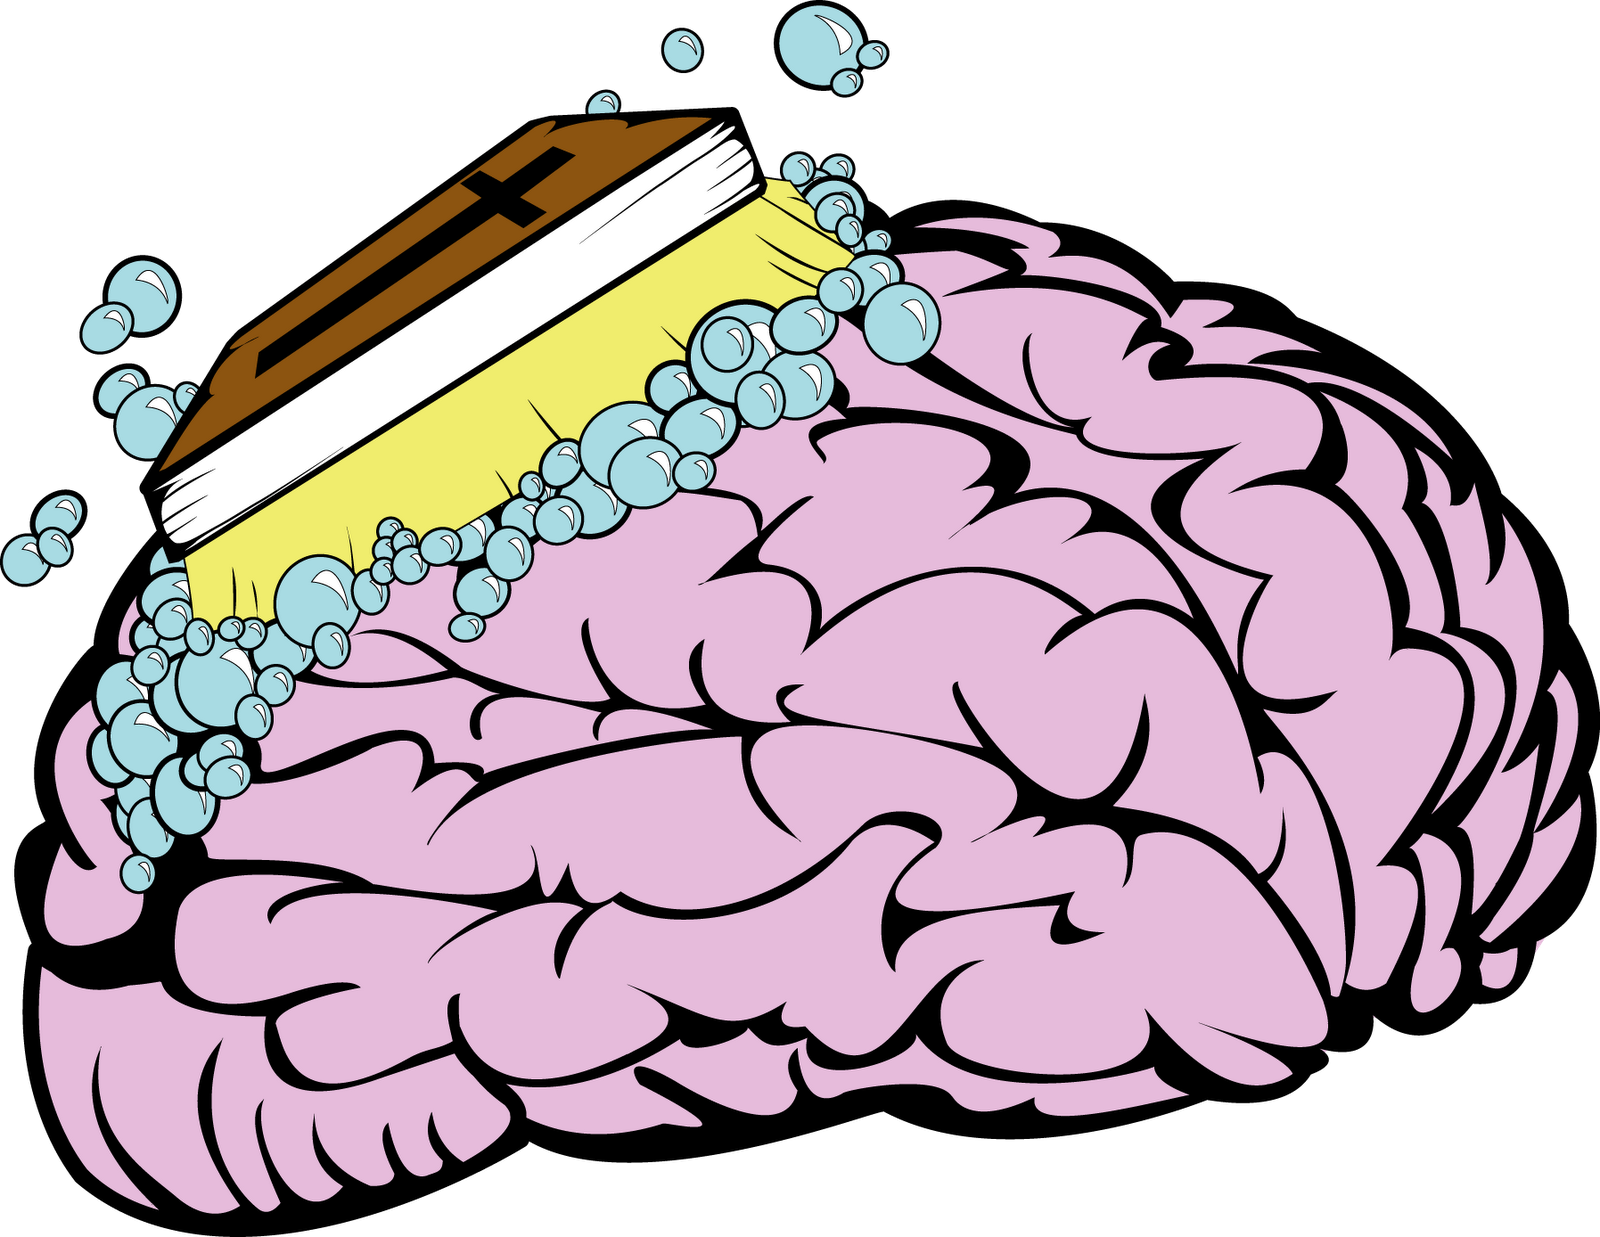 Graphic cartoon of brainwashing: a brain is being washed by a sponge